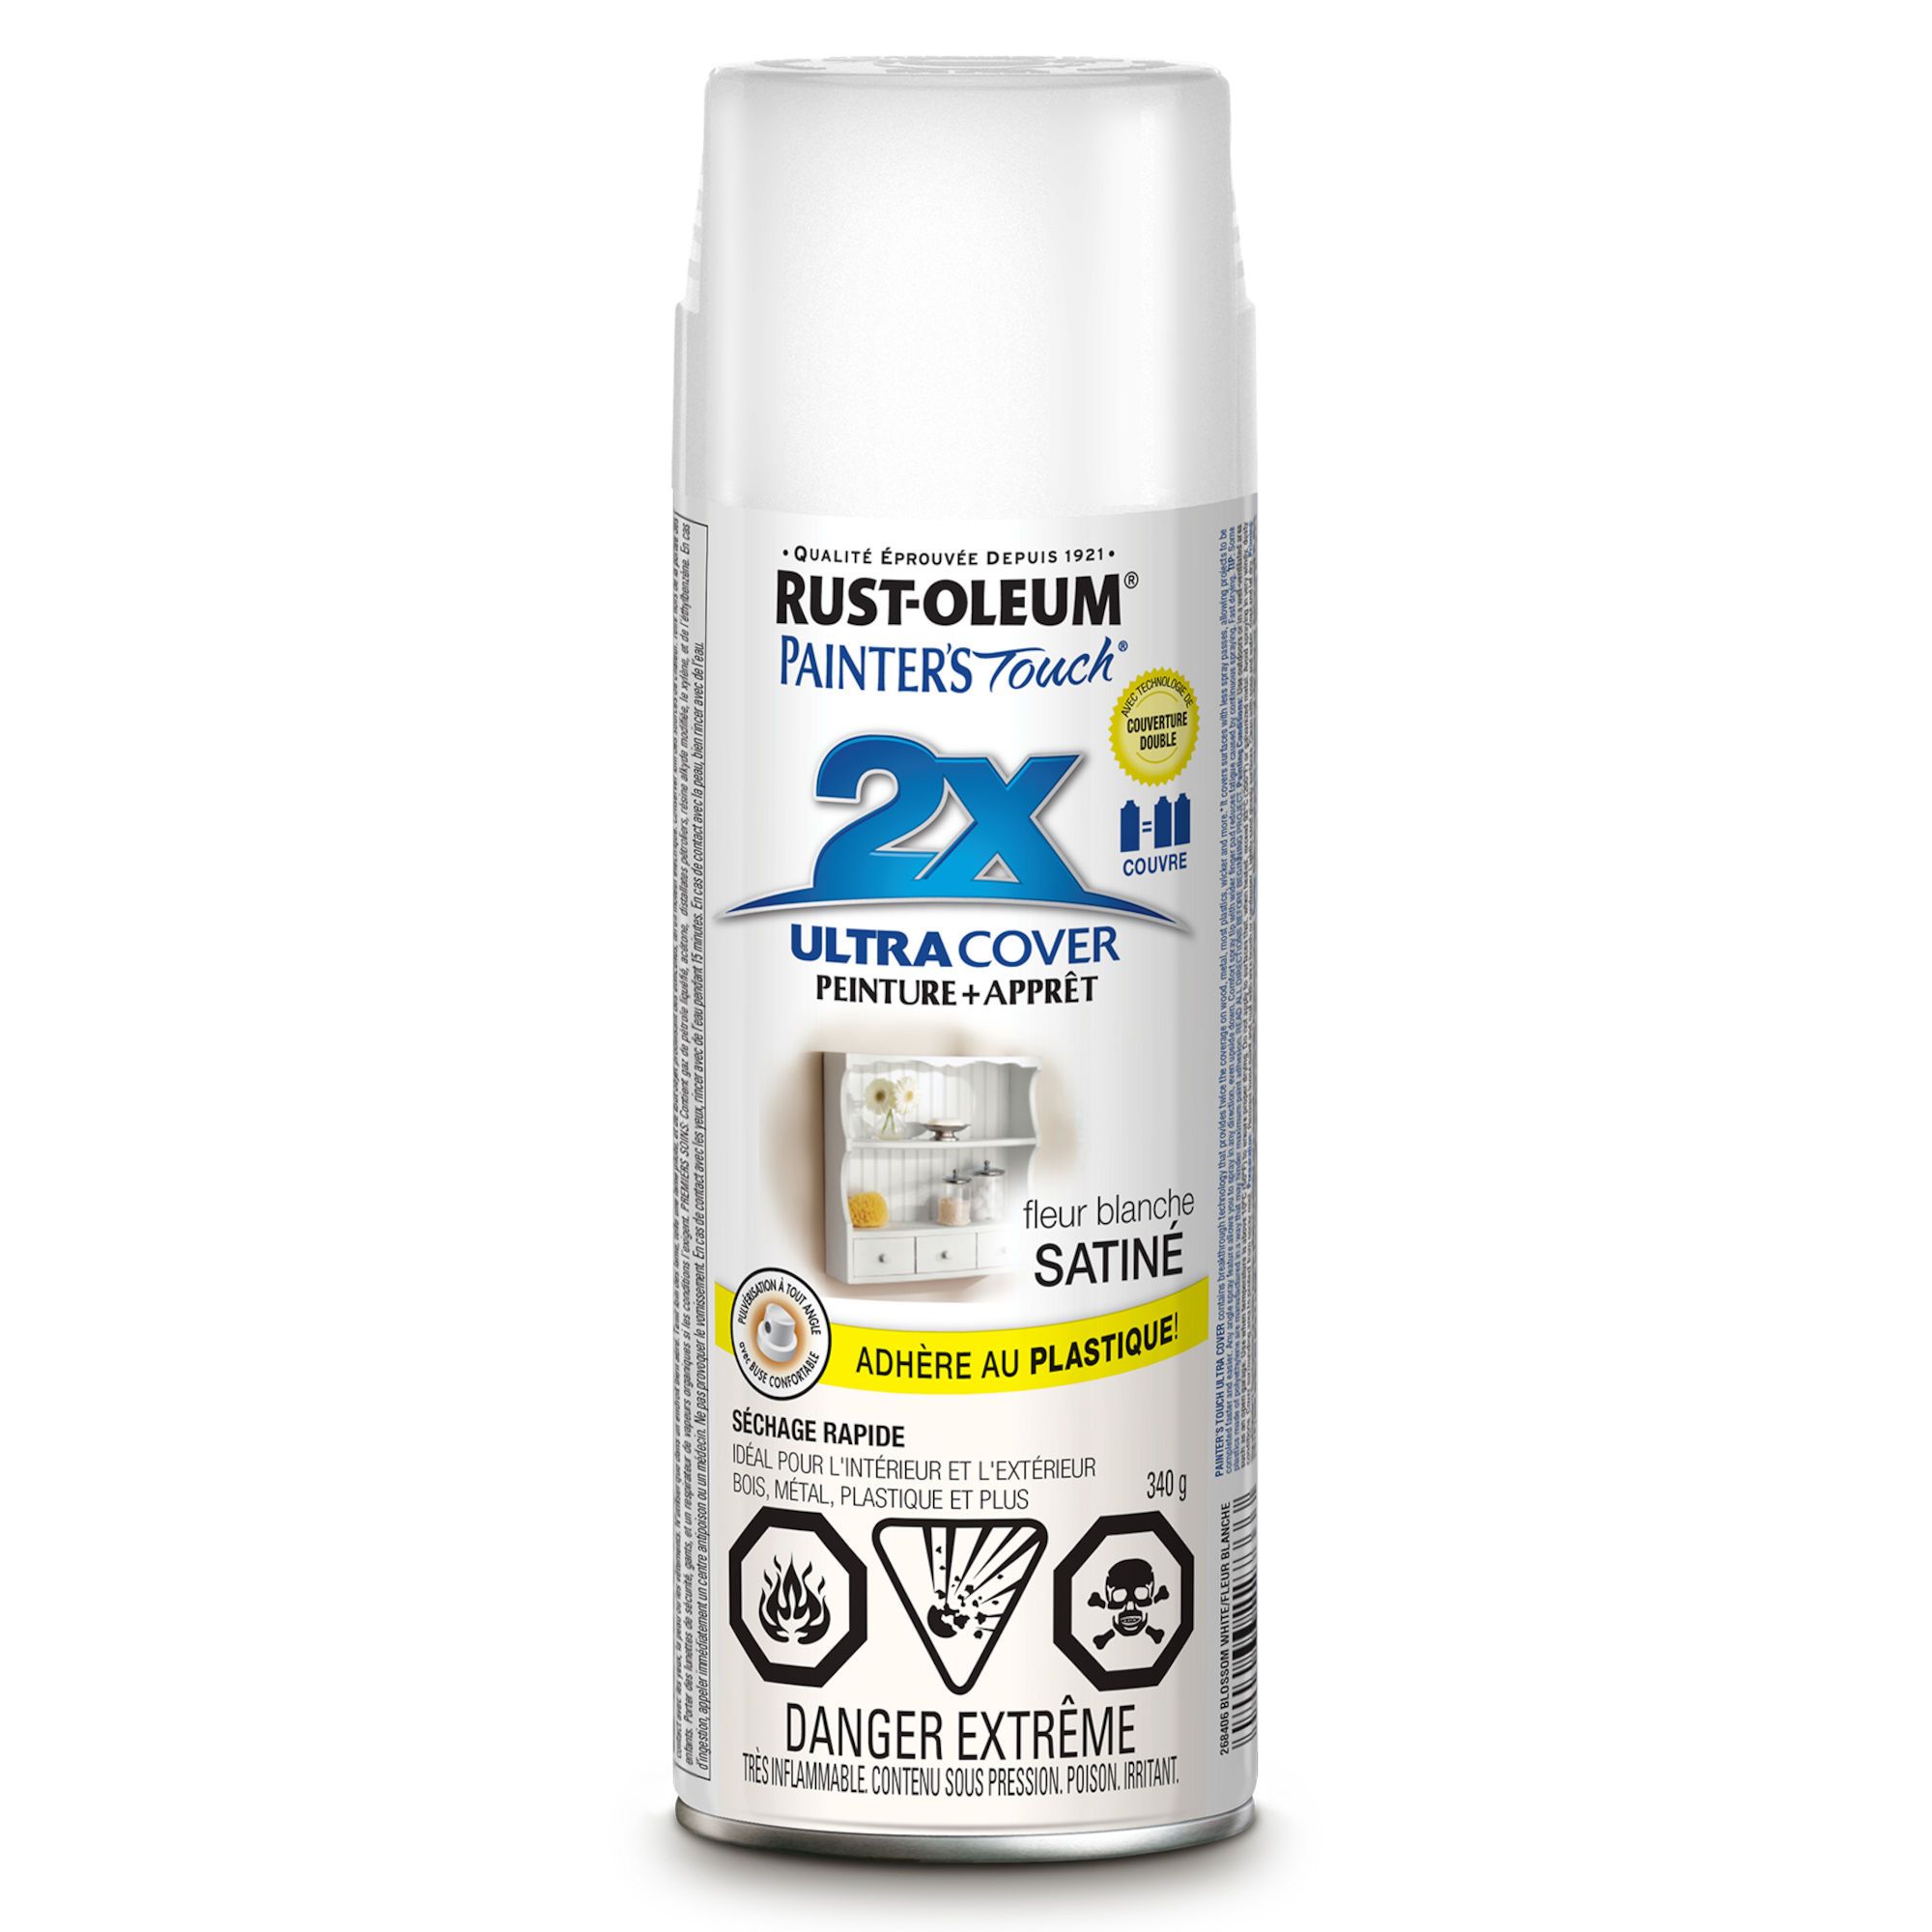 Ultra Cover 2X Spray Paint - Indoor/Outdoor - Satin - Blossom White - 340 g  from RUST-OLEUM